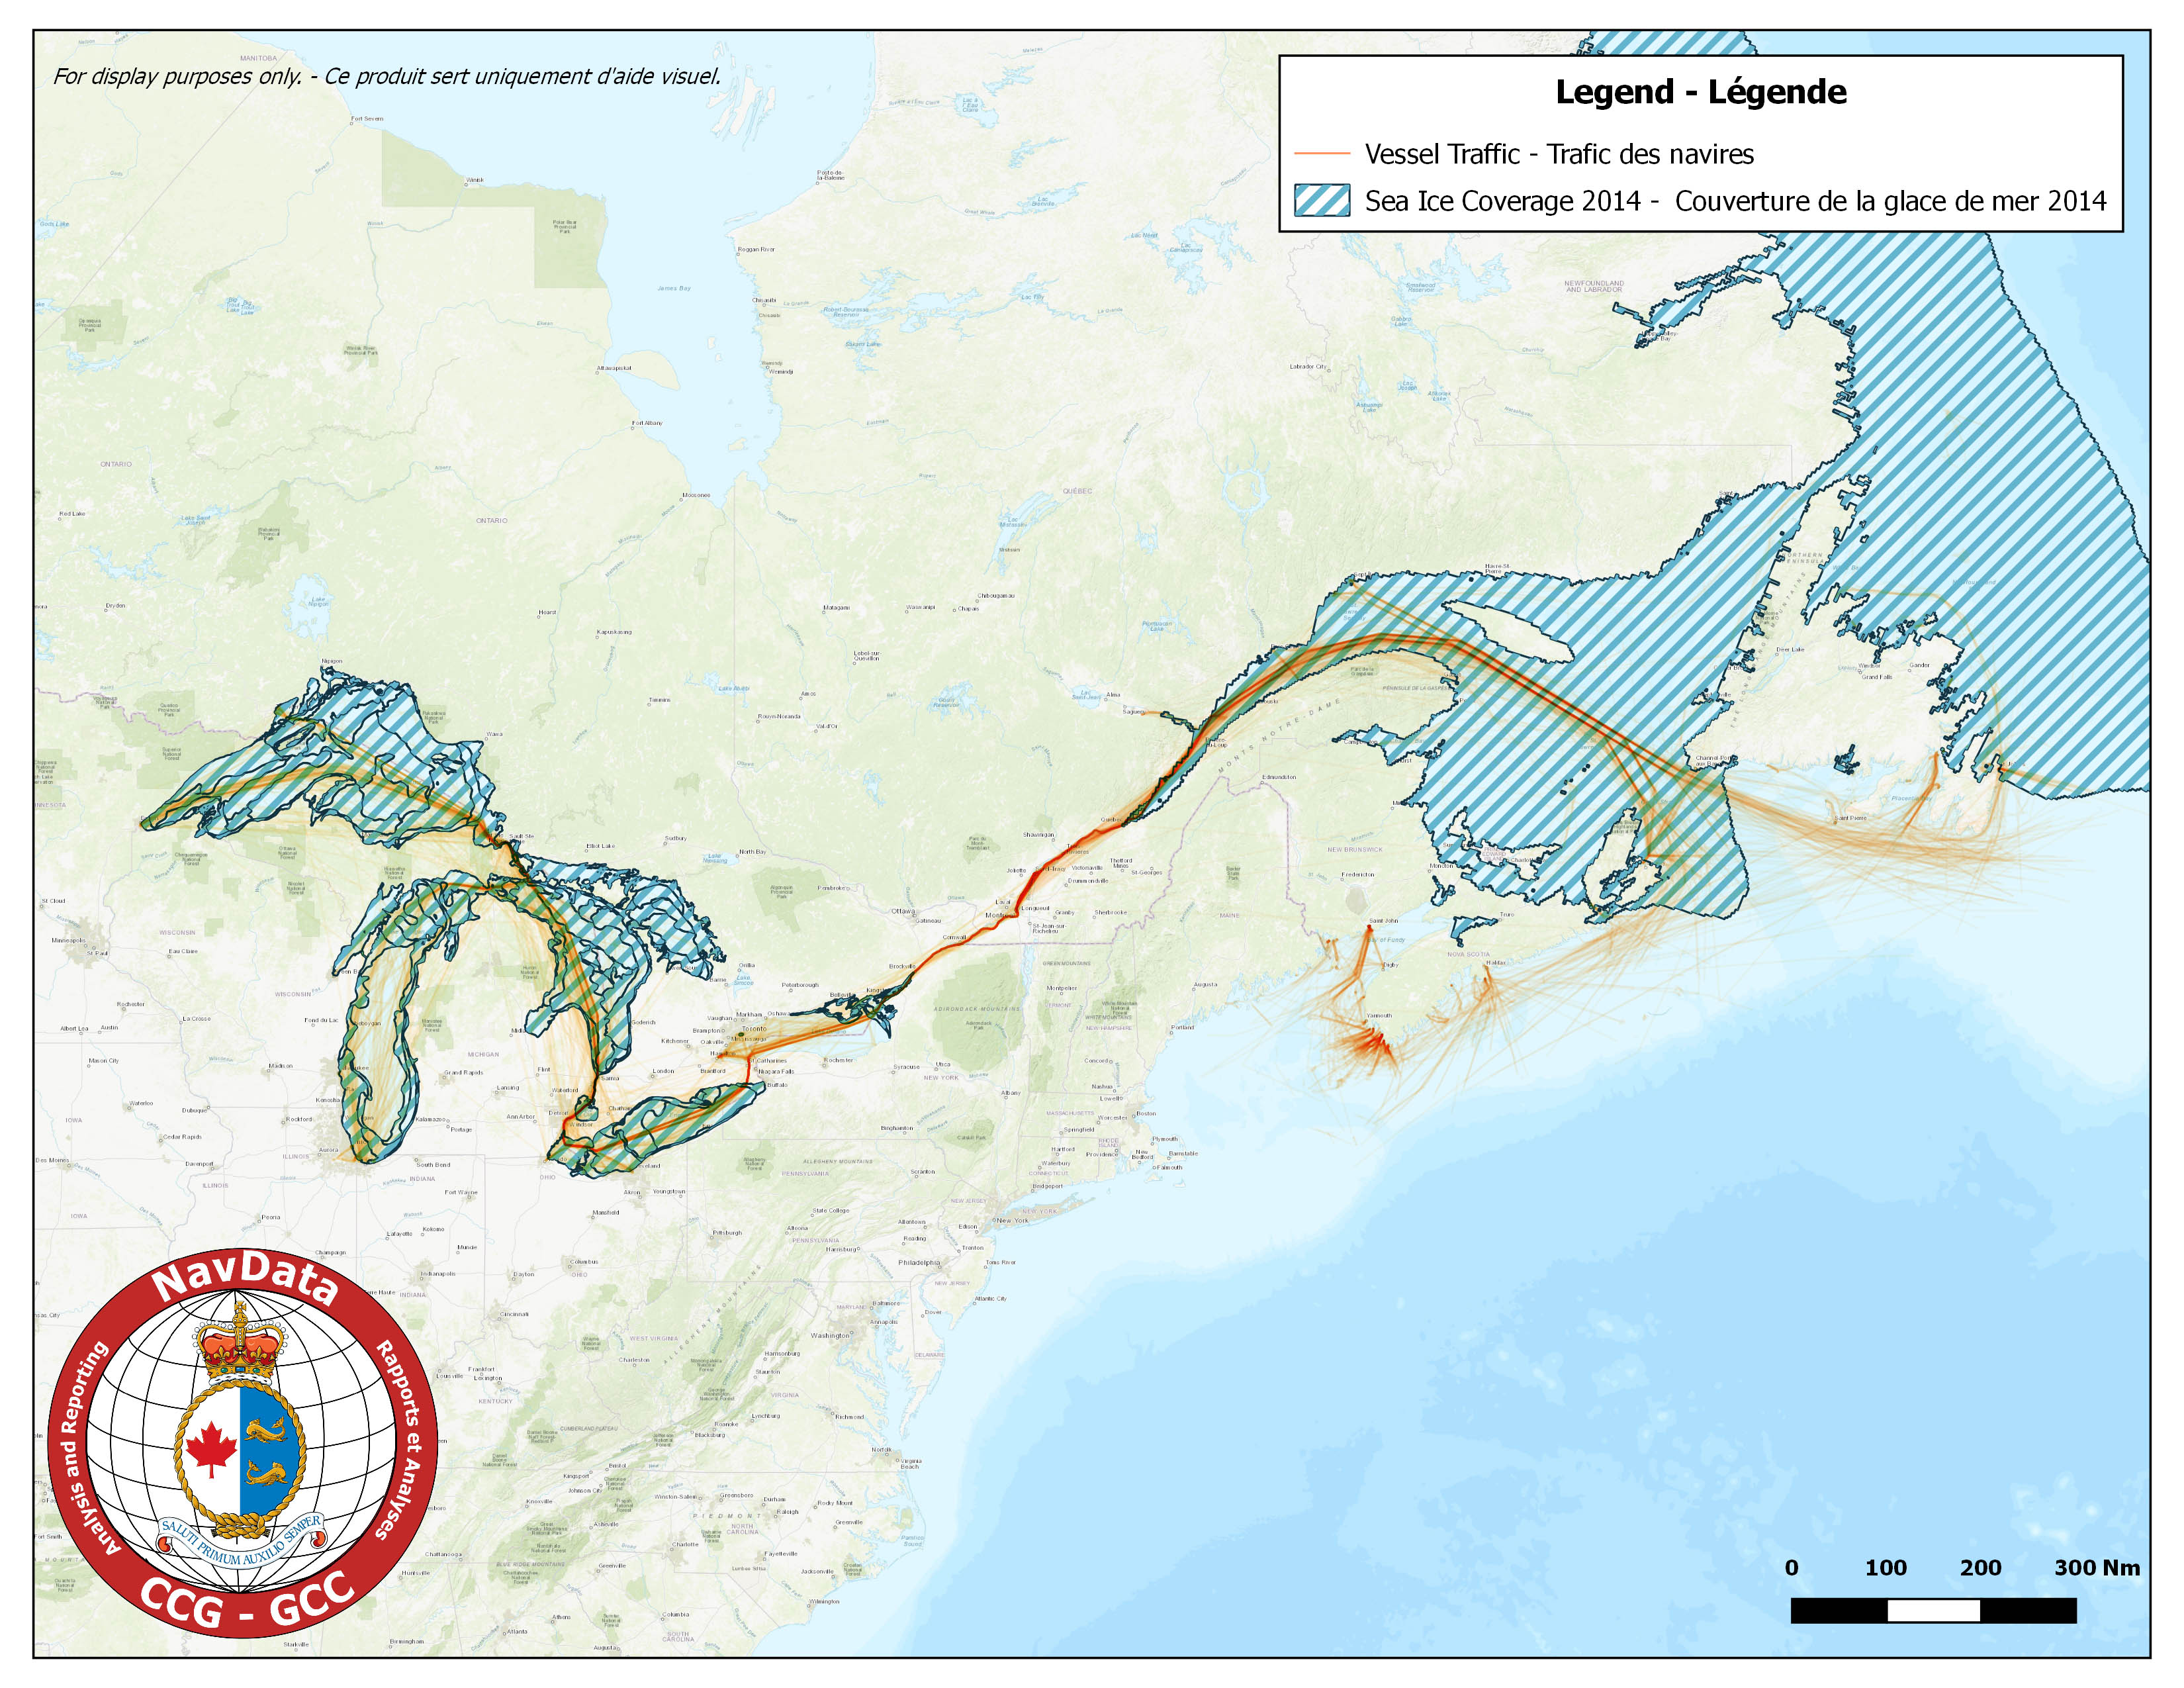 Map showing southern canada traffic density and maximum ice coverage for season of 2014